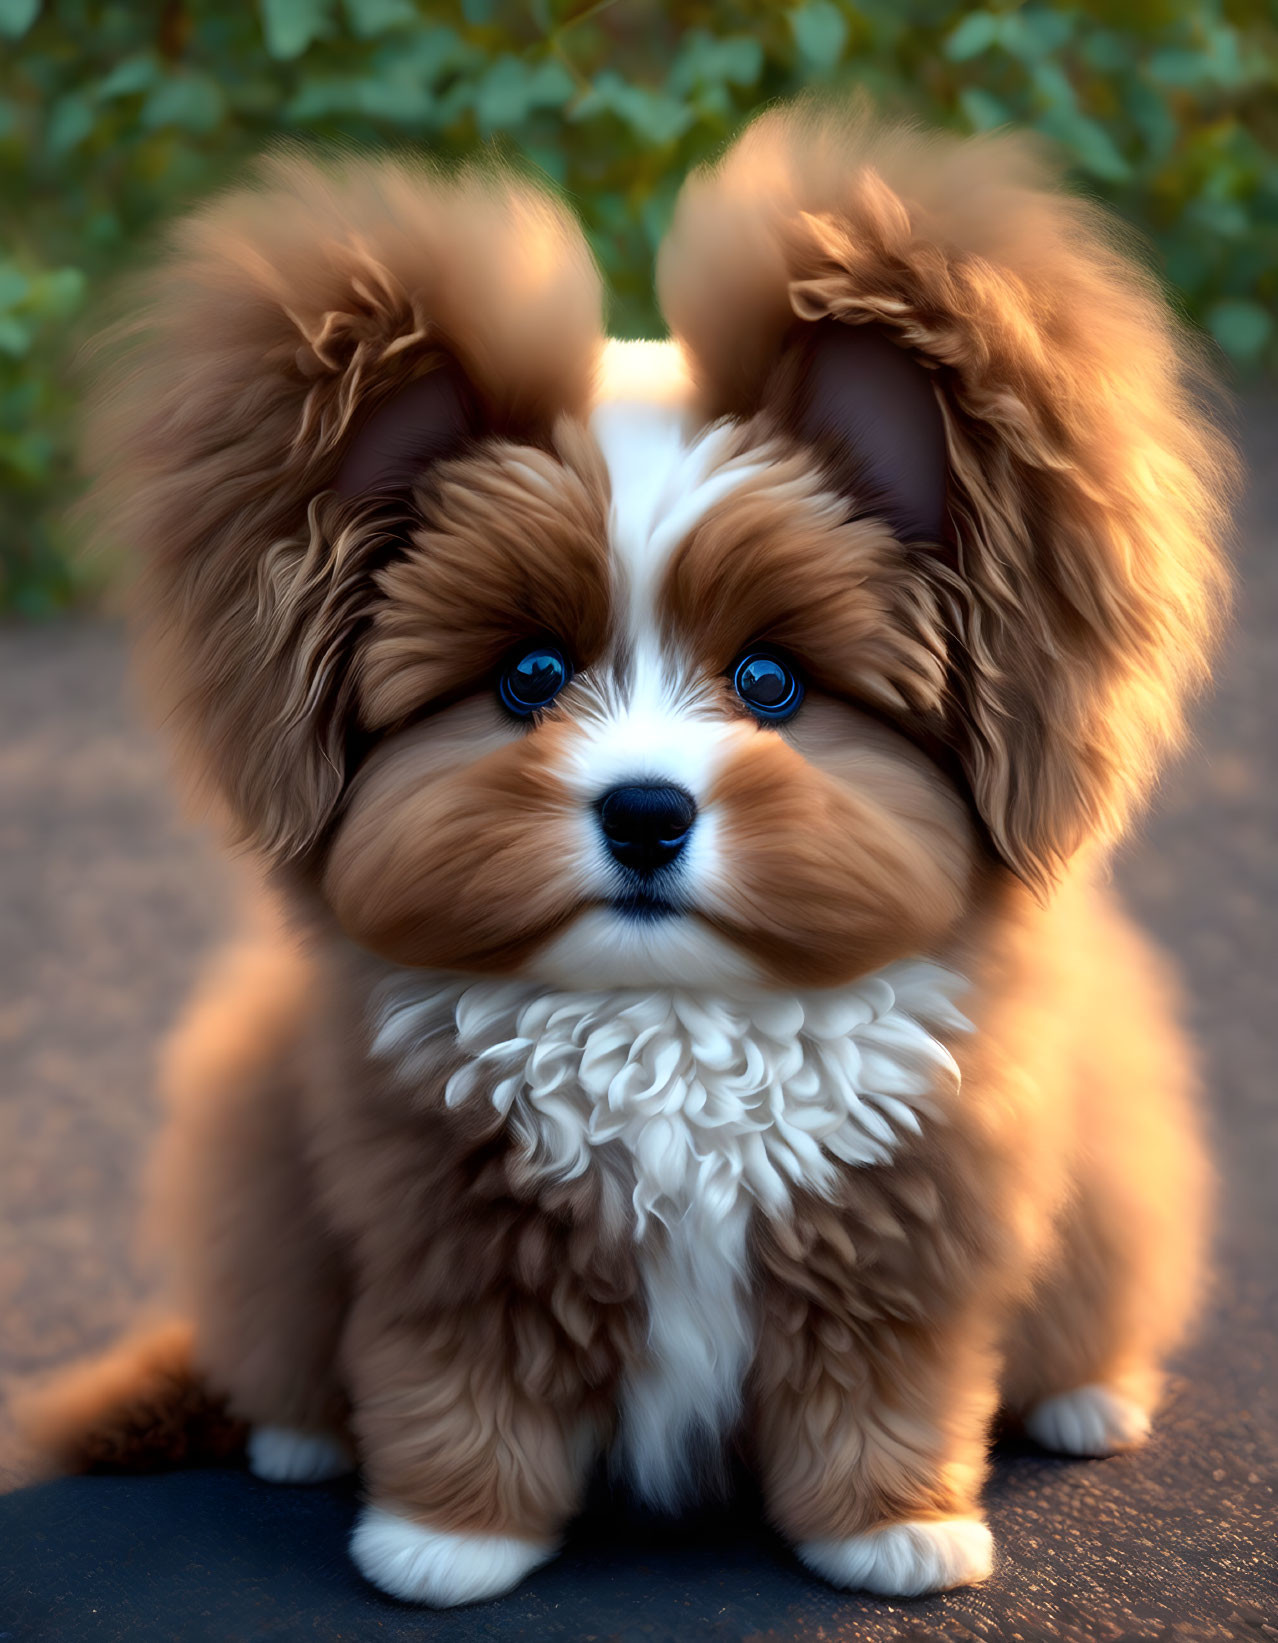 Fluffy Brown-and-White Puppy with Blue Eyes and Furry Ears